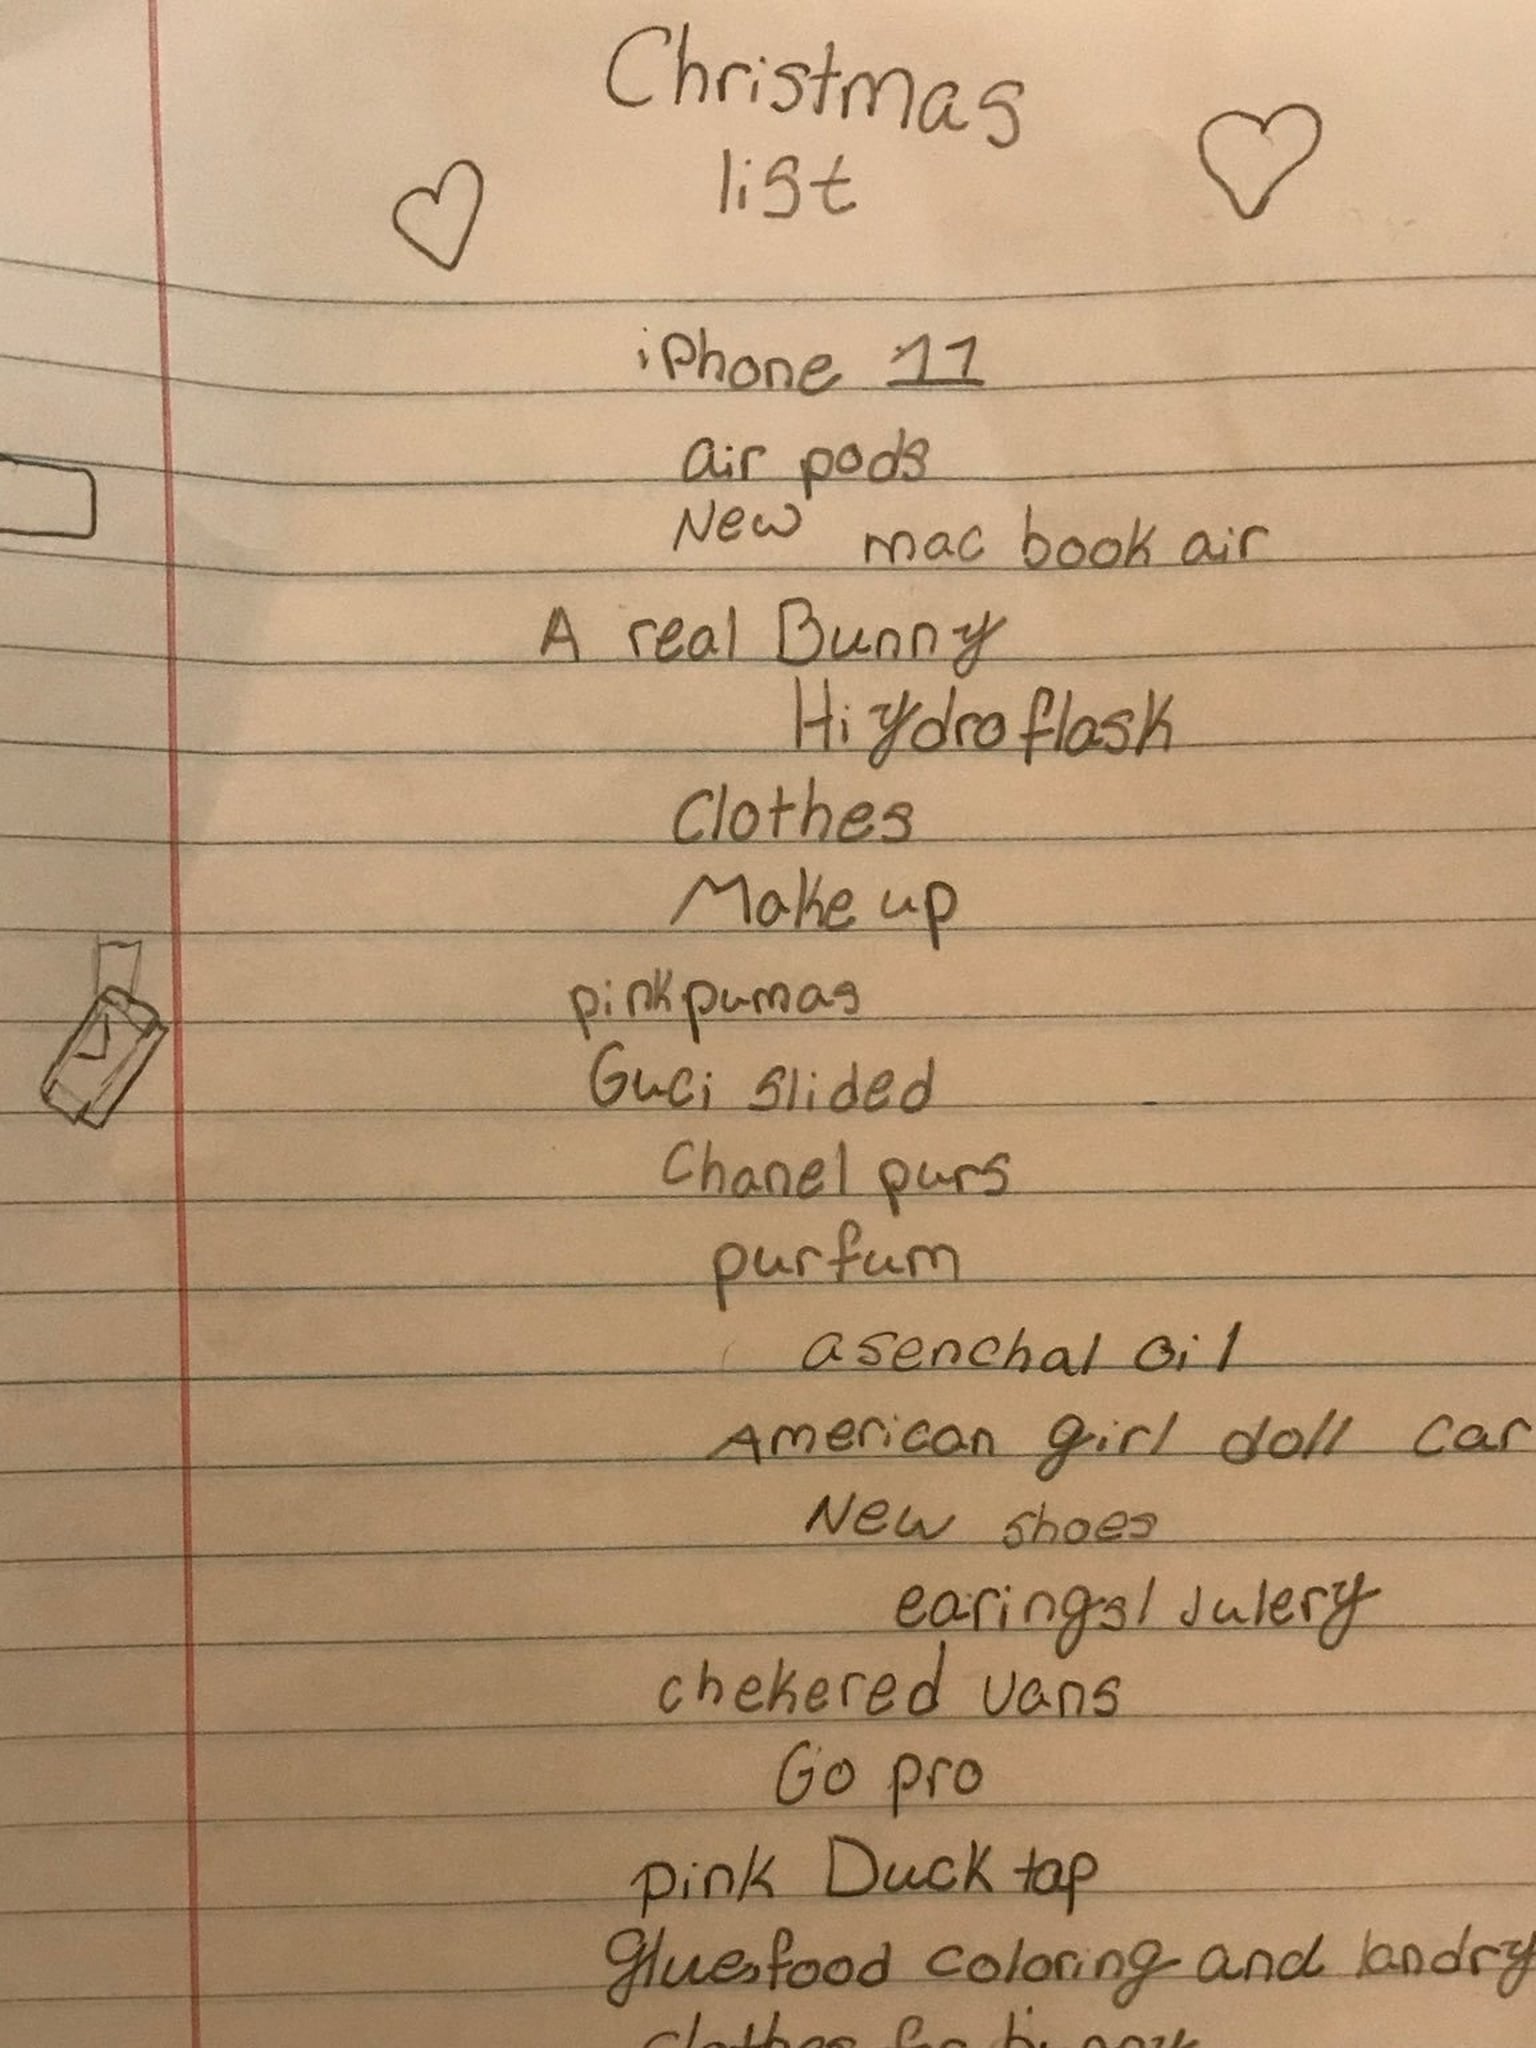 See This 10-Year-Old's Ridiculously Expensive Christmas List